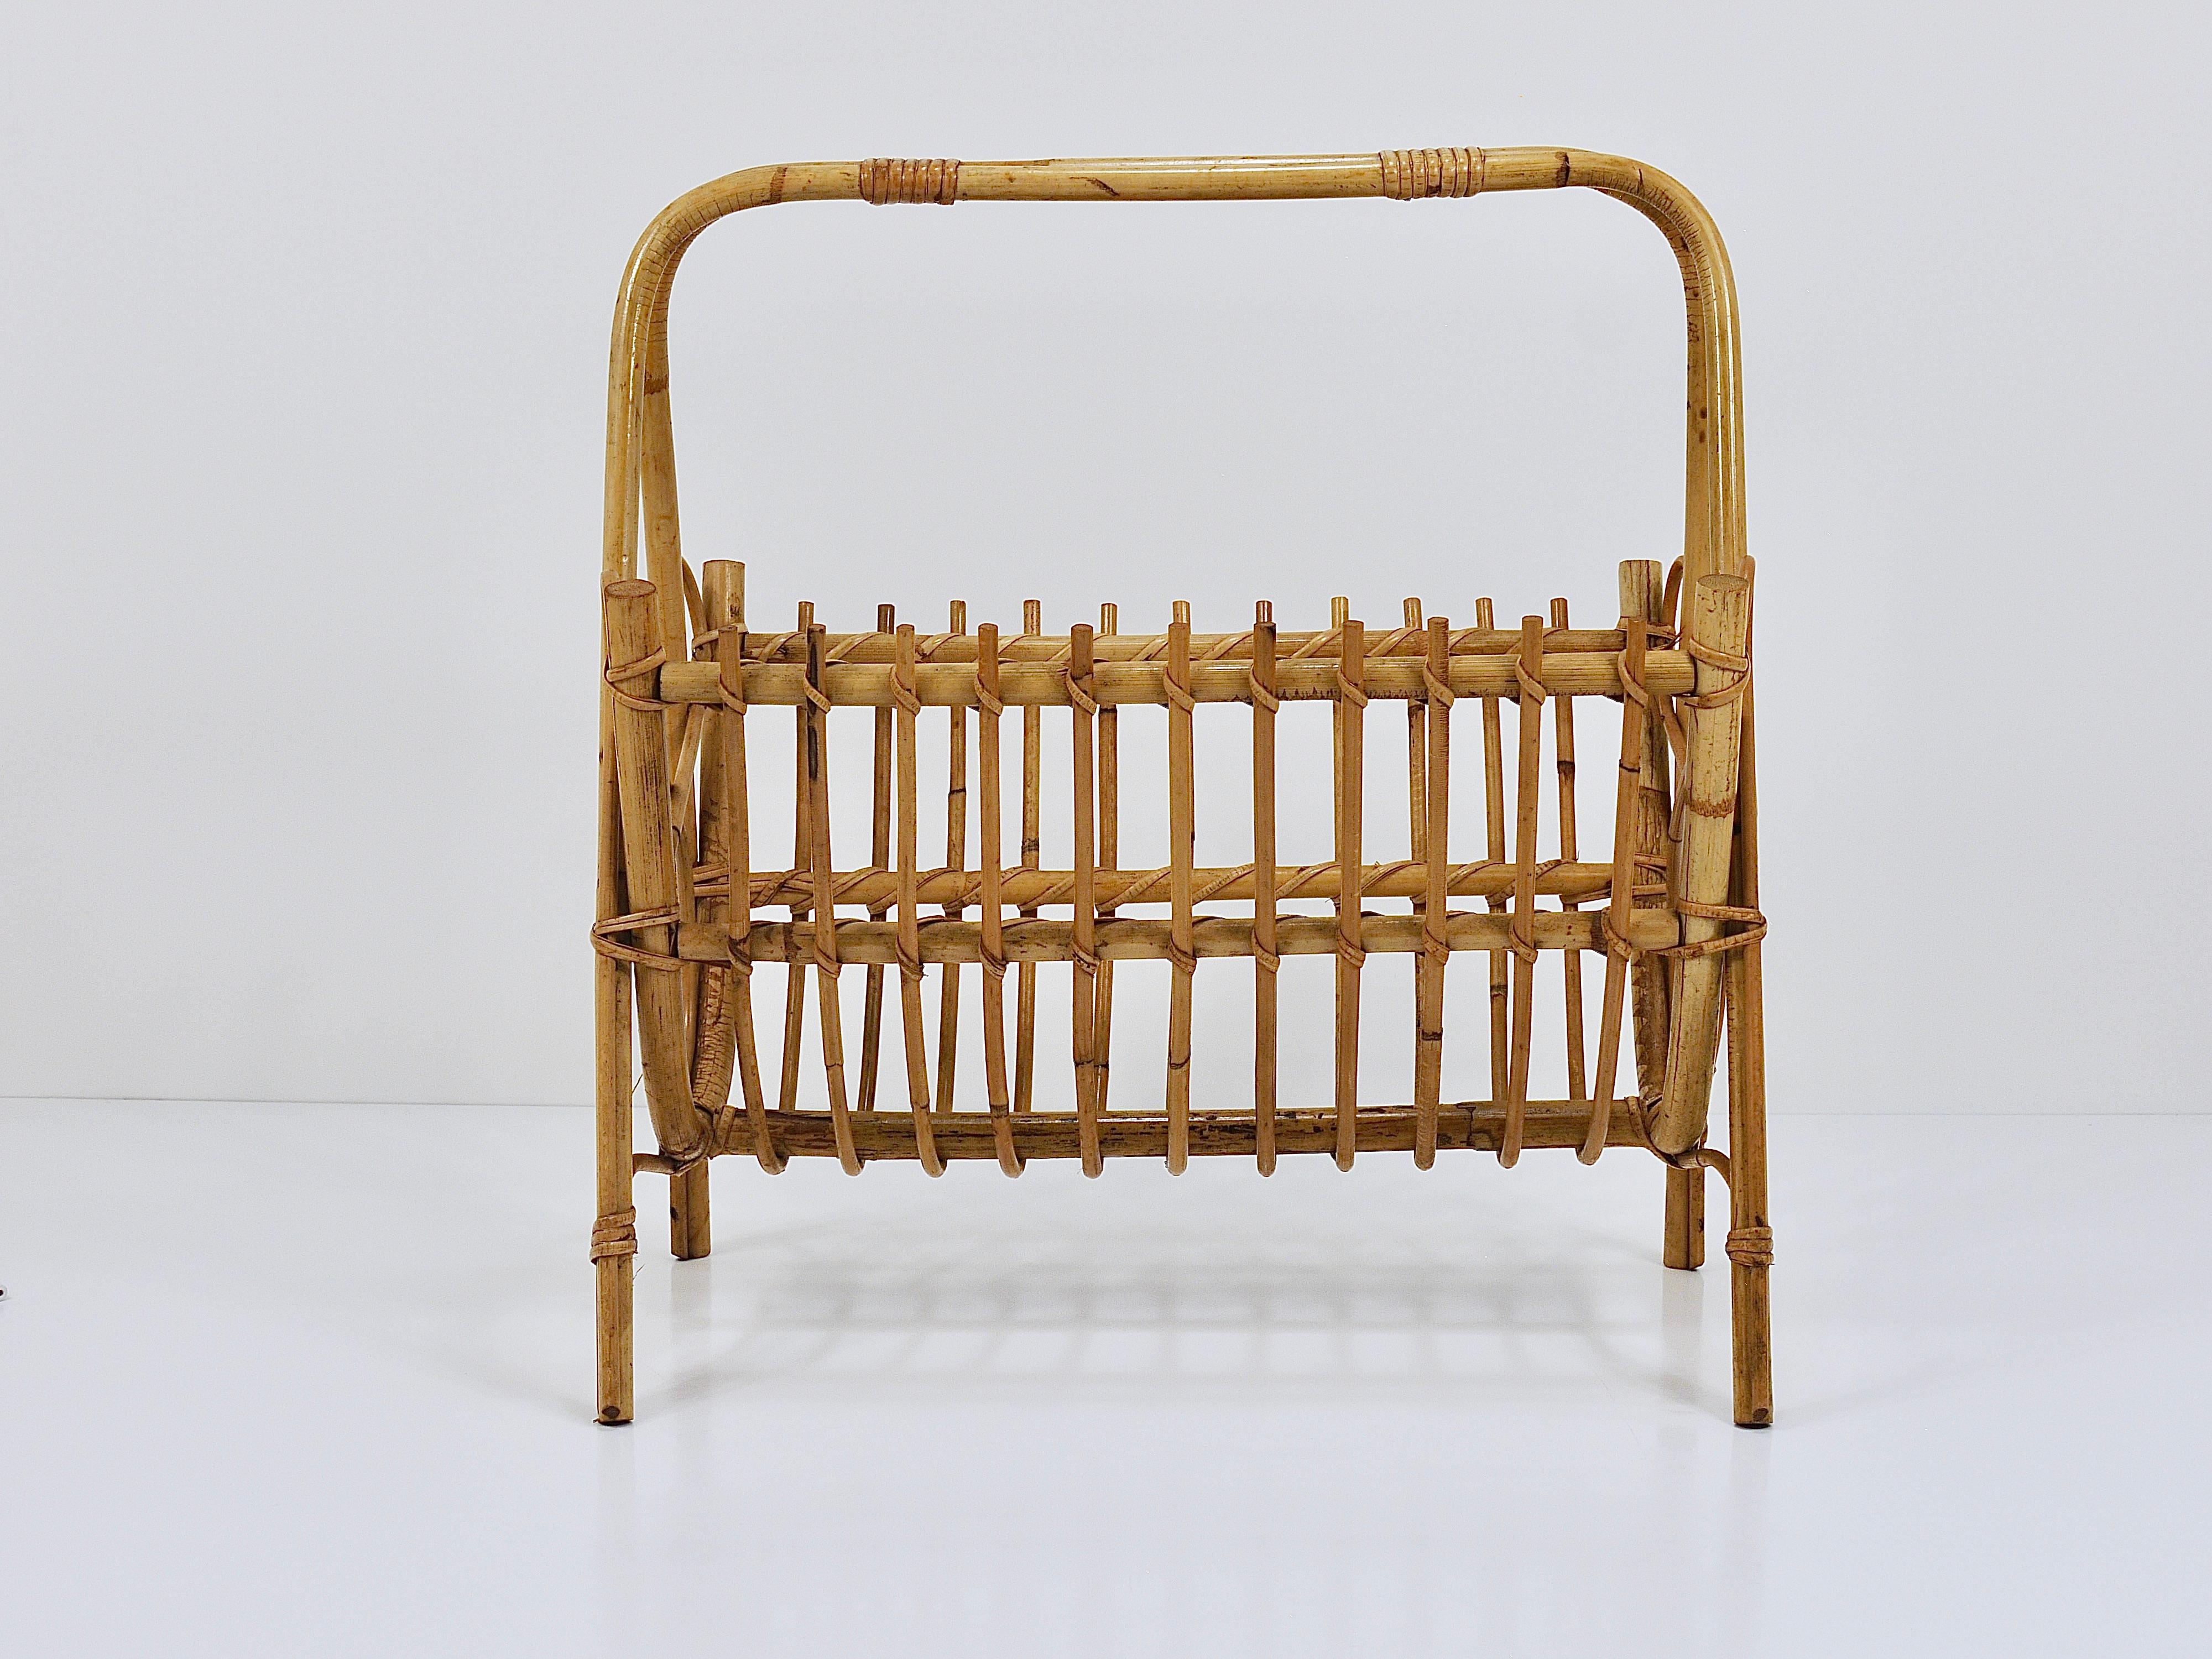 A chic French Riviera style midcentury modern bamboo rattan newspaper rack / magazine holder from the 1950s/1960s. Traditionally handmade of bent bamboo and rattan / cane / wicker. A decorative, vintage piece of furniture, which can be also used as